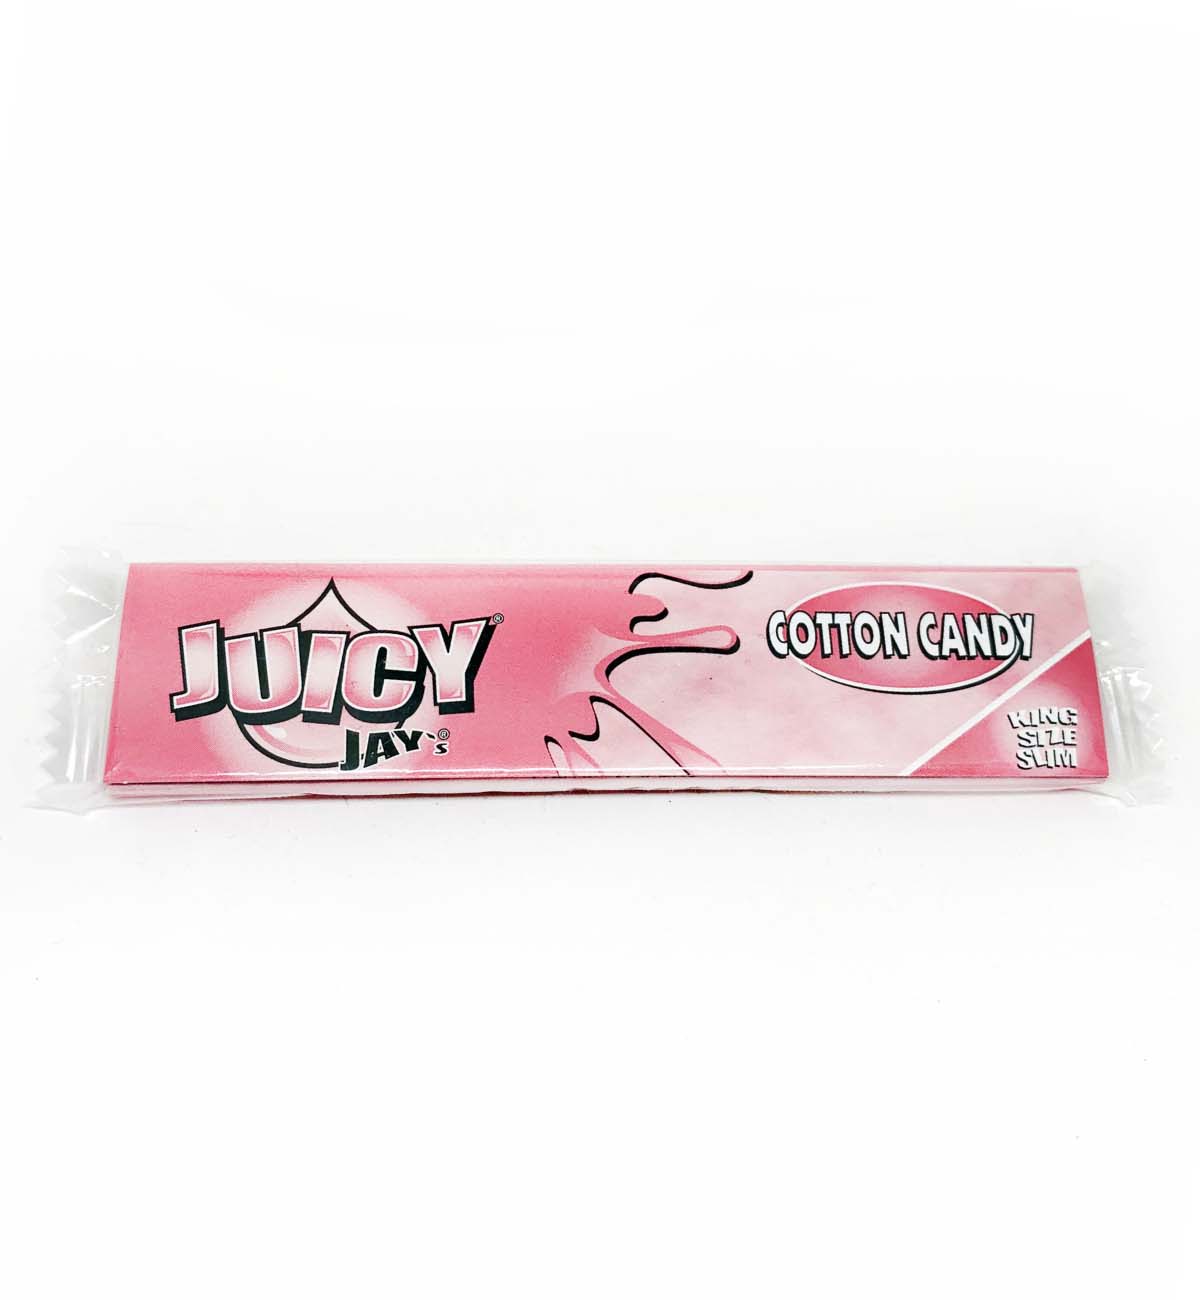 juicy jays cotton candy